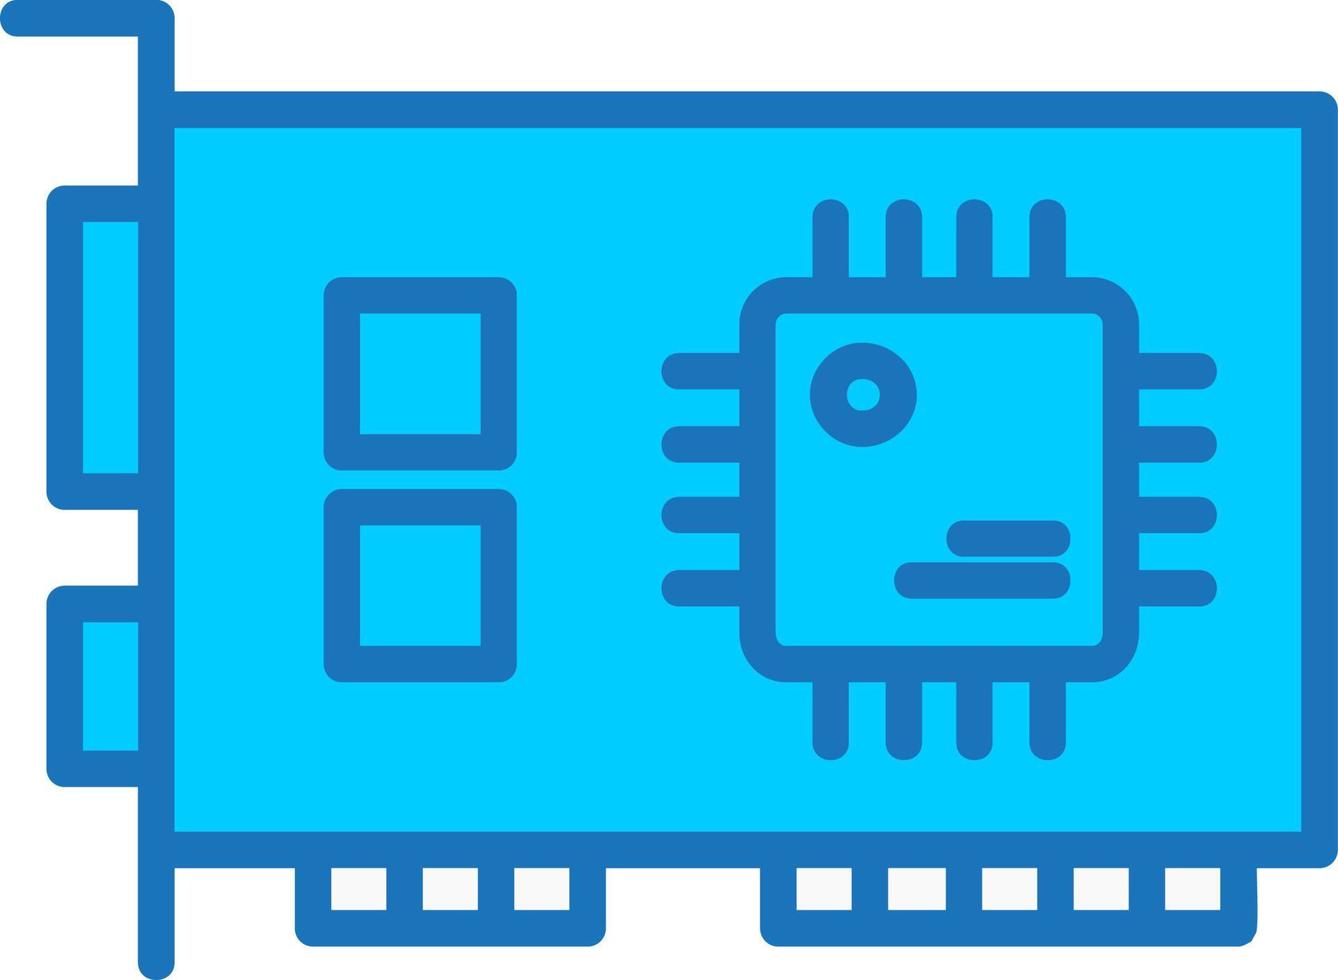 Network Interface Card Vector Icon